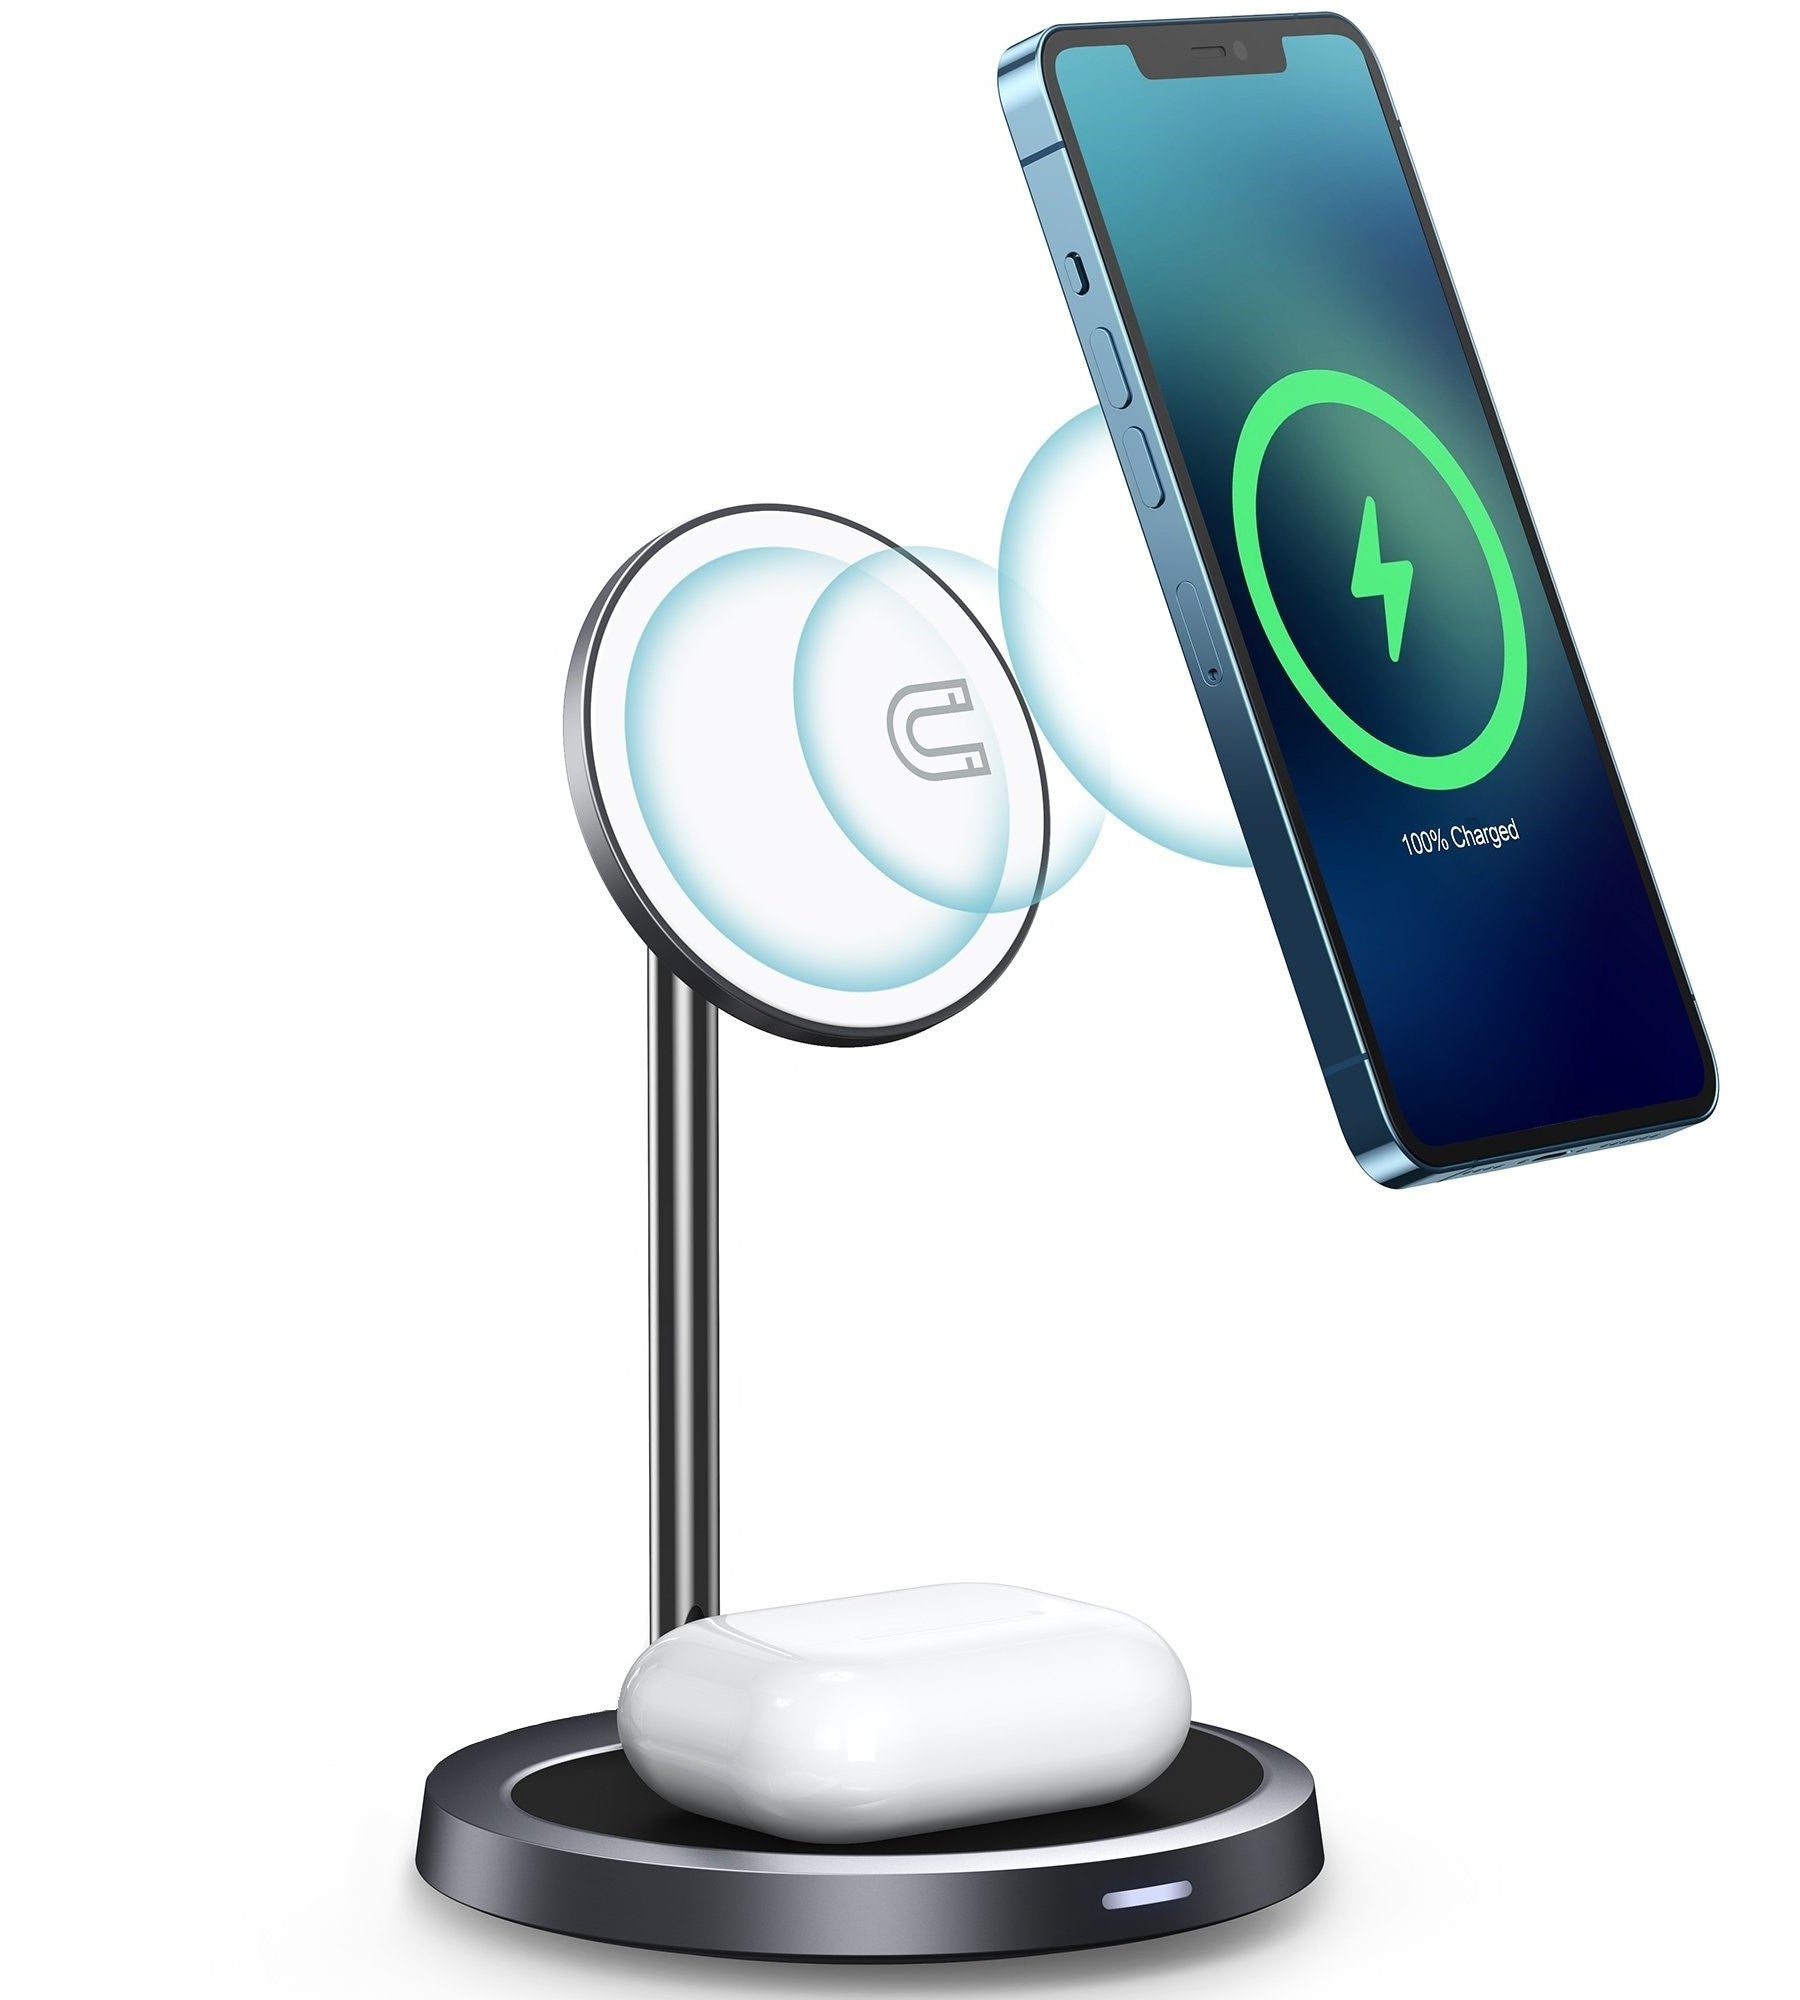 Choetech 2 in 1 15W Magsafe Magnetic Dock Wireless Charger Earbuds